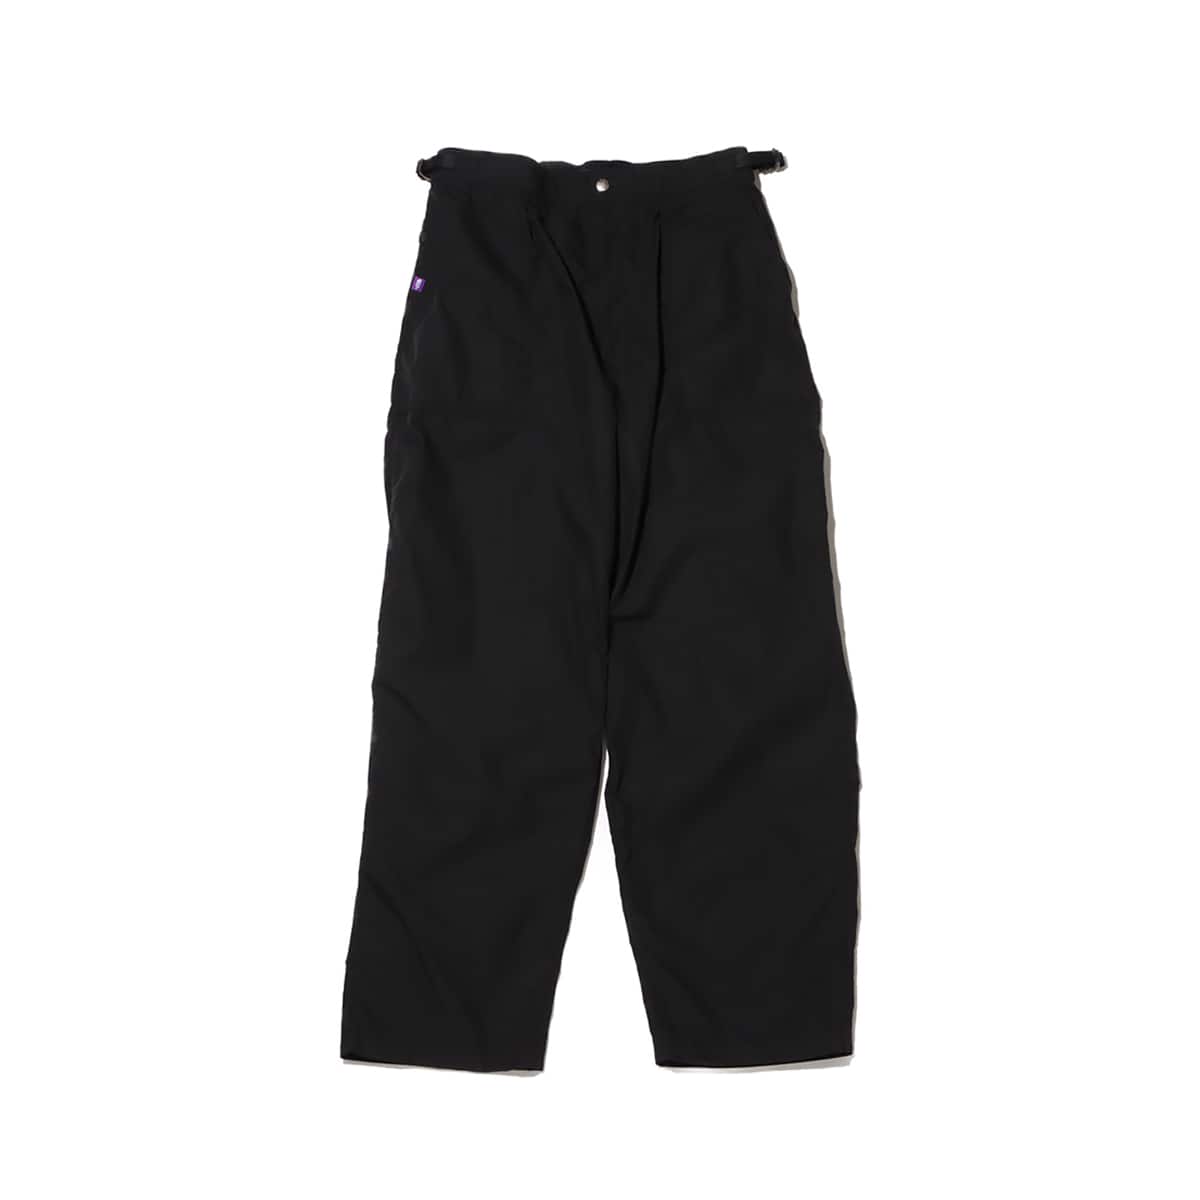 THE NORTH FACE PURPLE LABEL 65/35 Field Pants Black 24SS-I